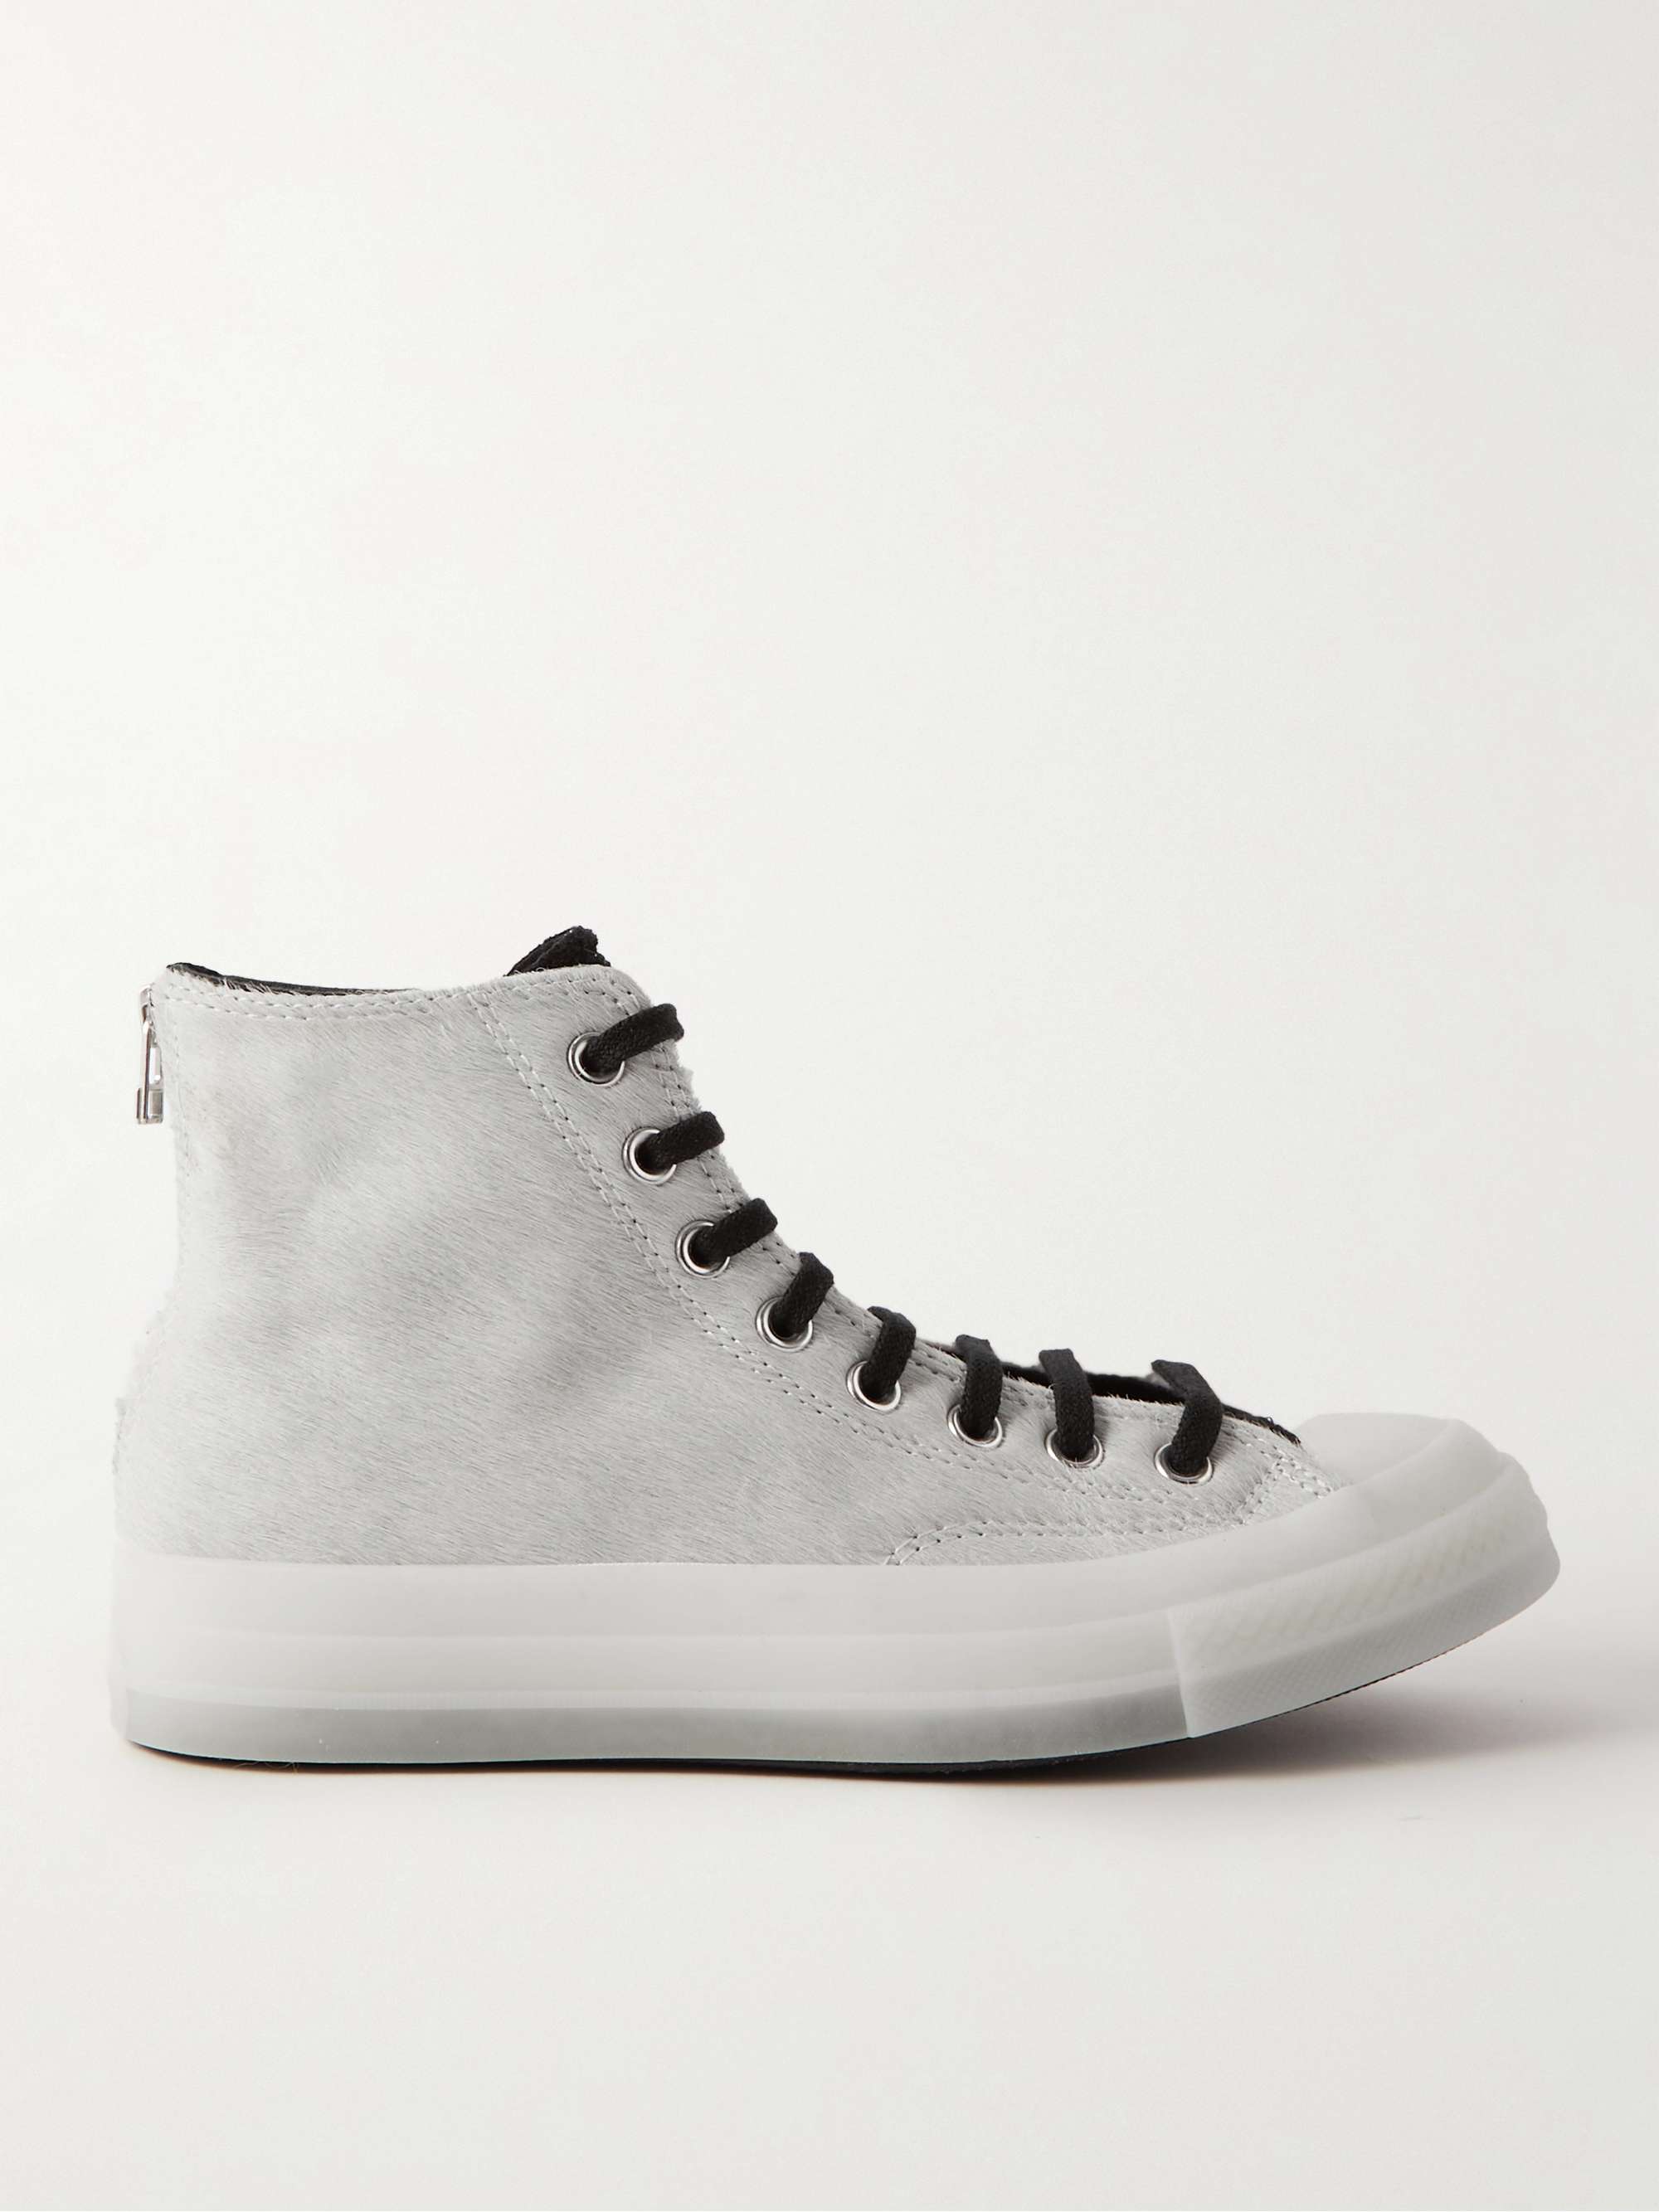 White + Clot Chuck 70 Faux Shearling and Calf Hair High-Top Sneakers |  CONVERSE | MR PORTER